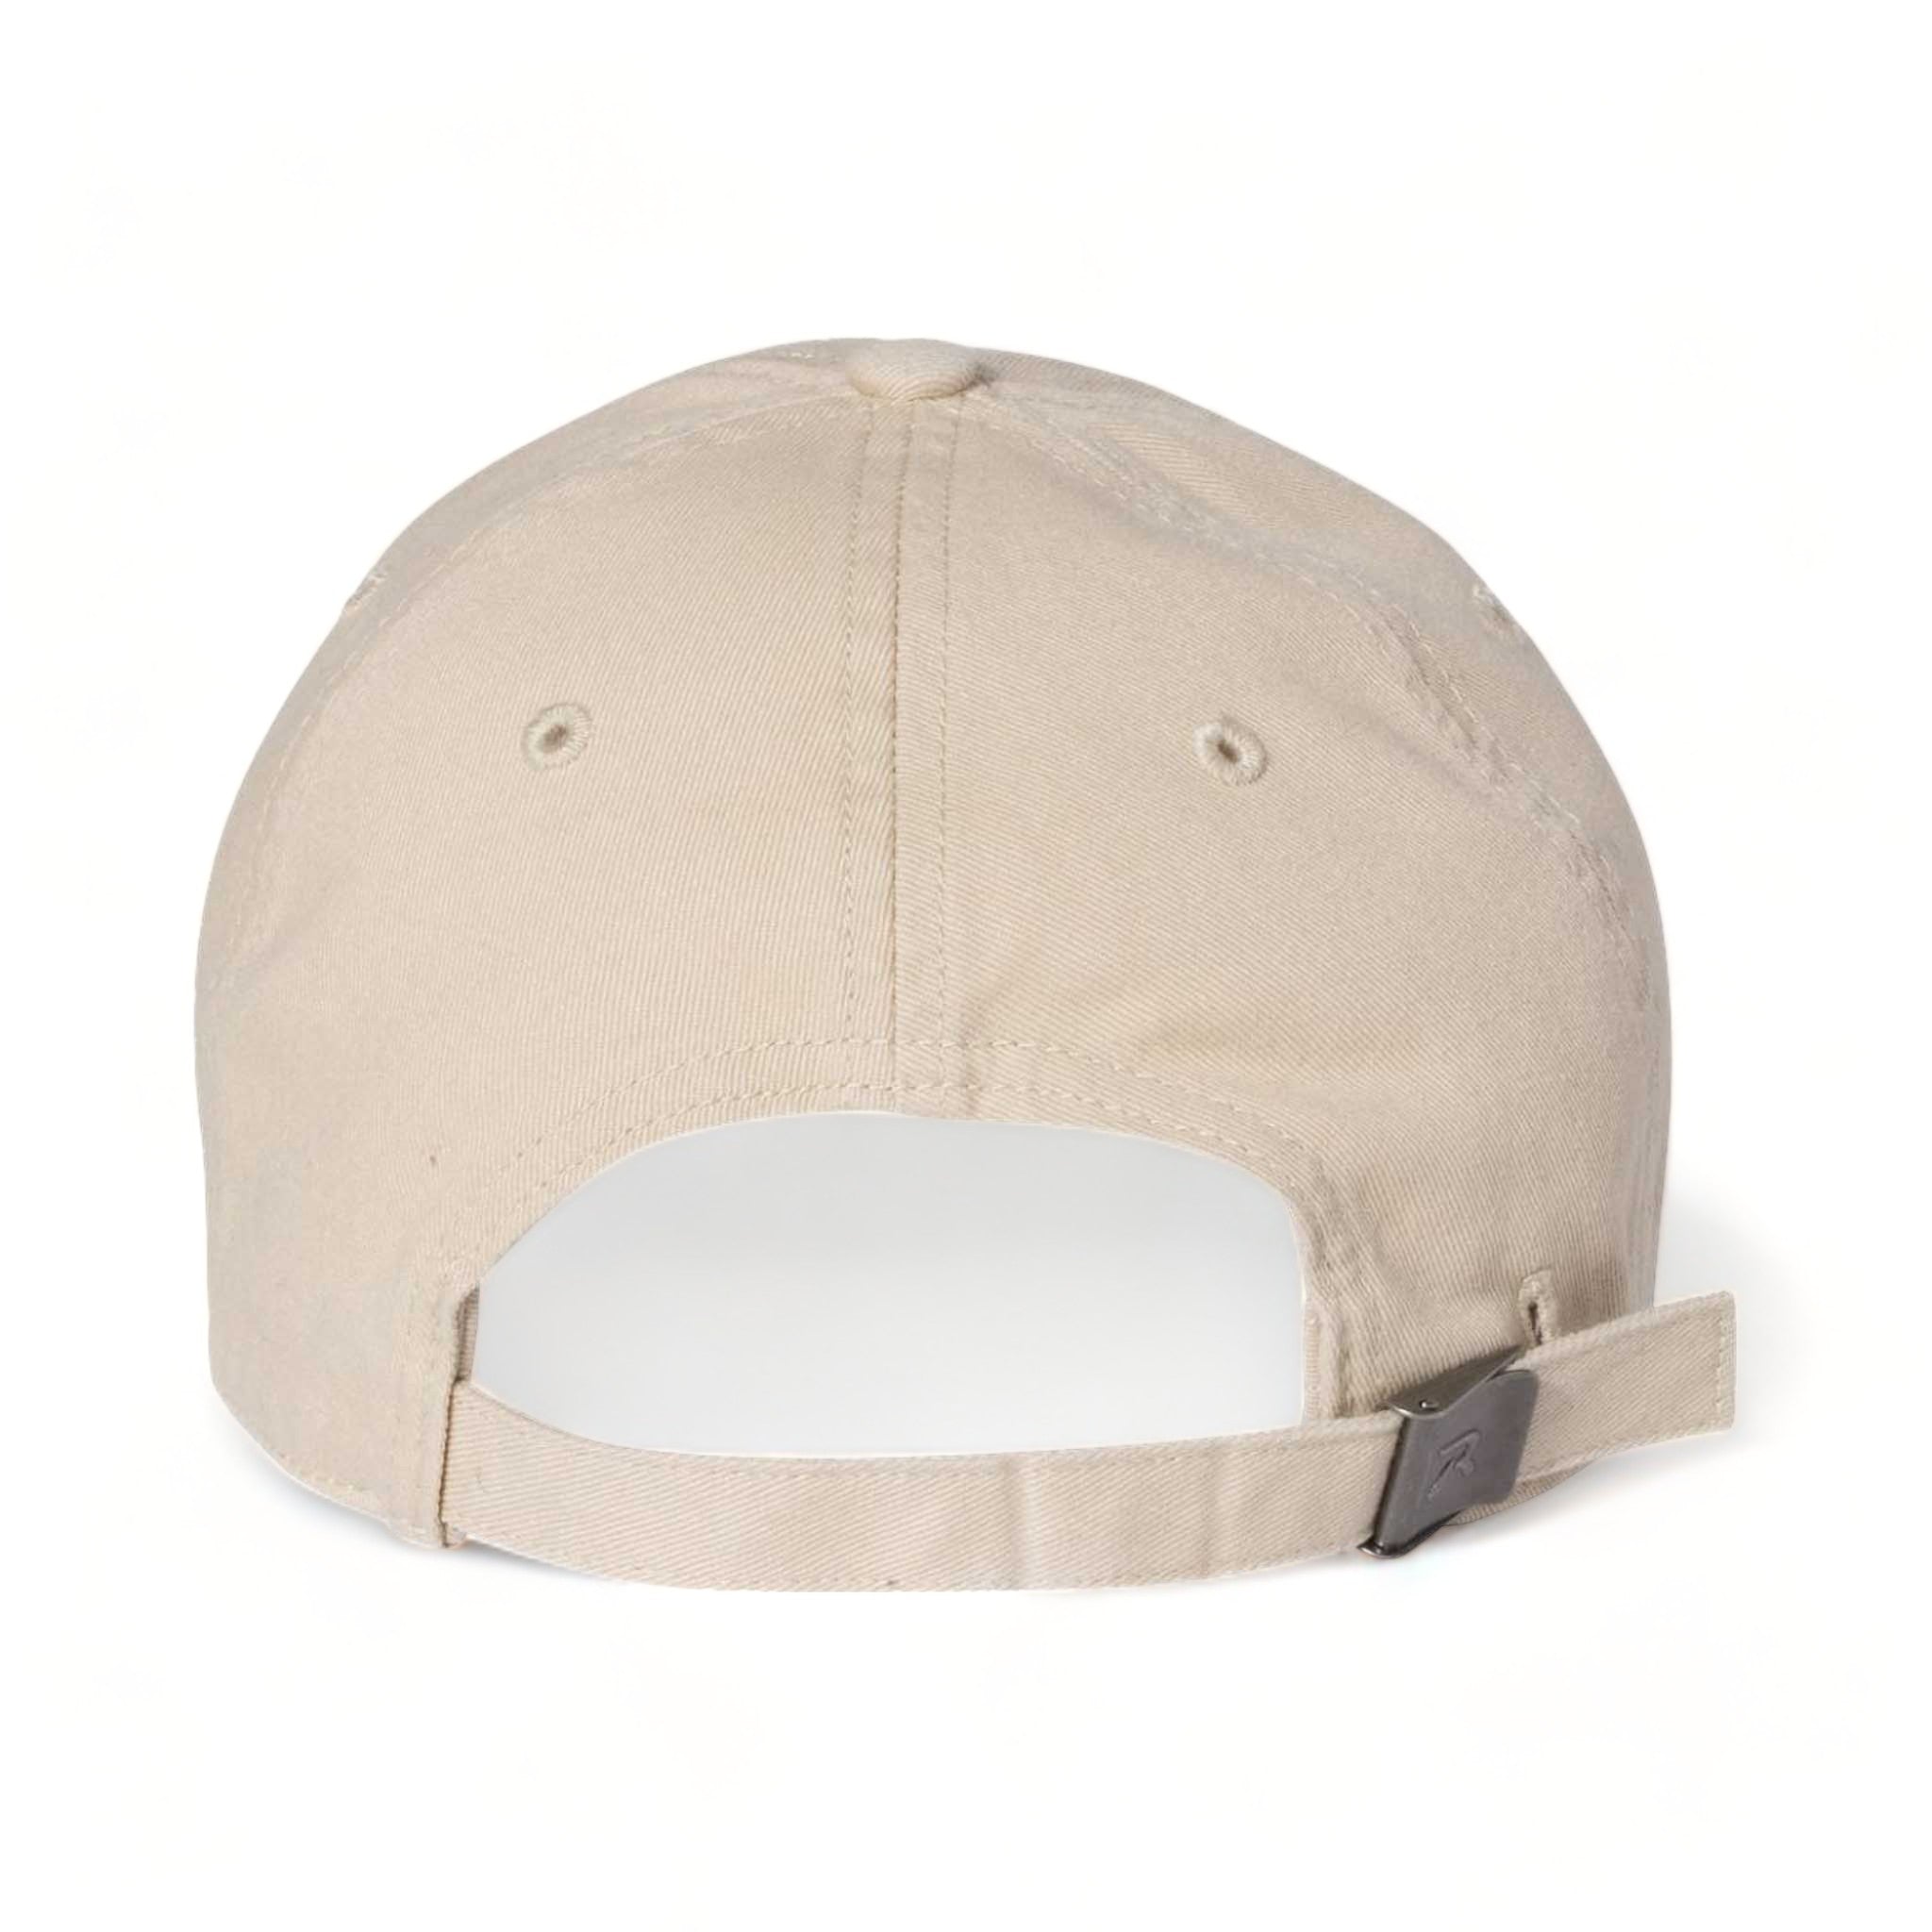 Back view of Richardson 320 custom hat in stone